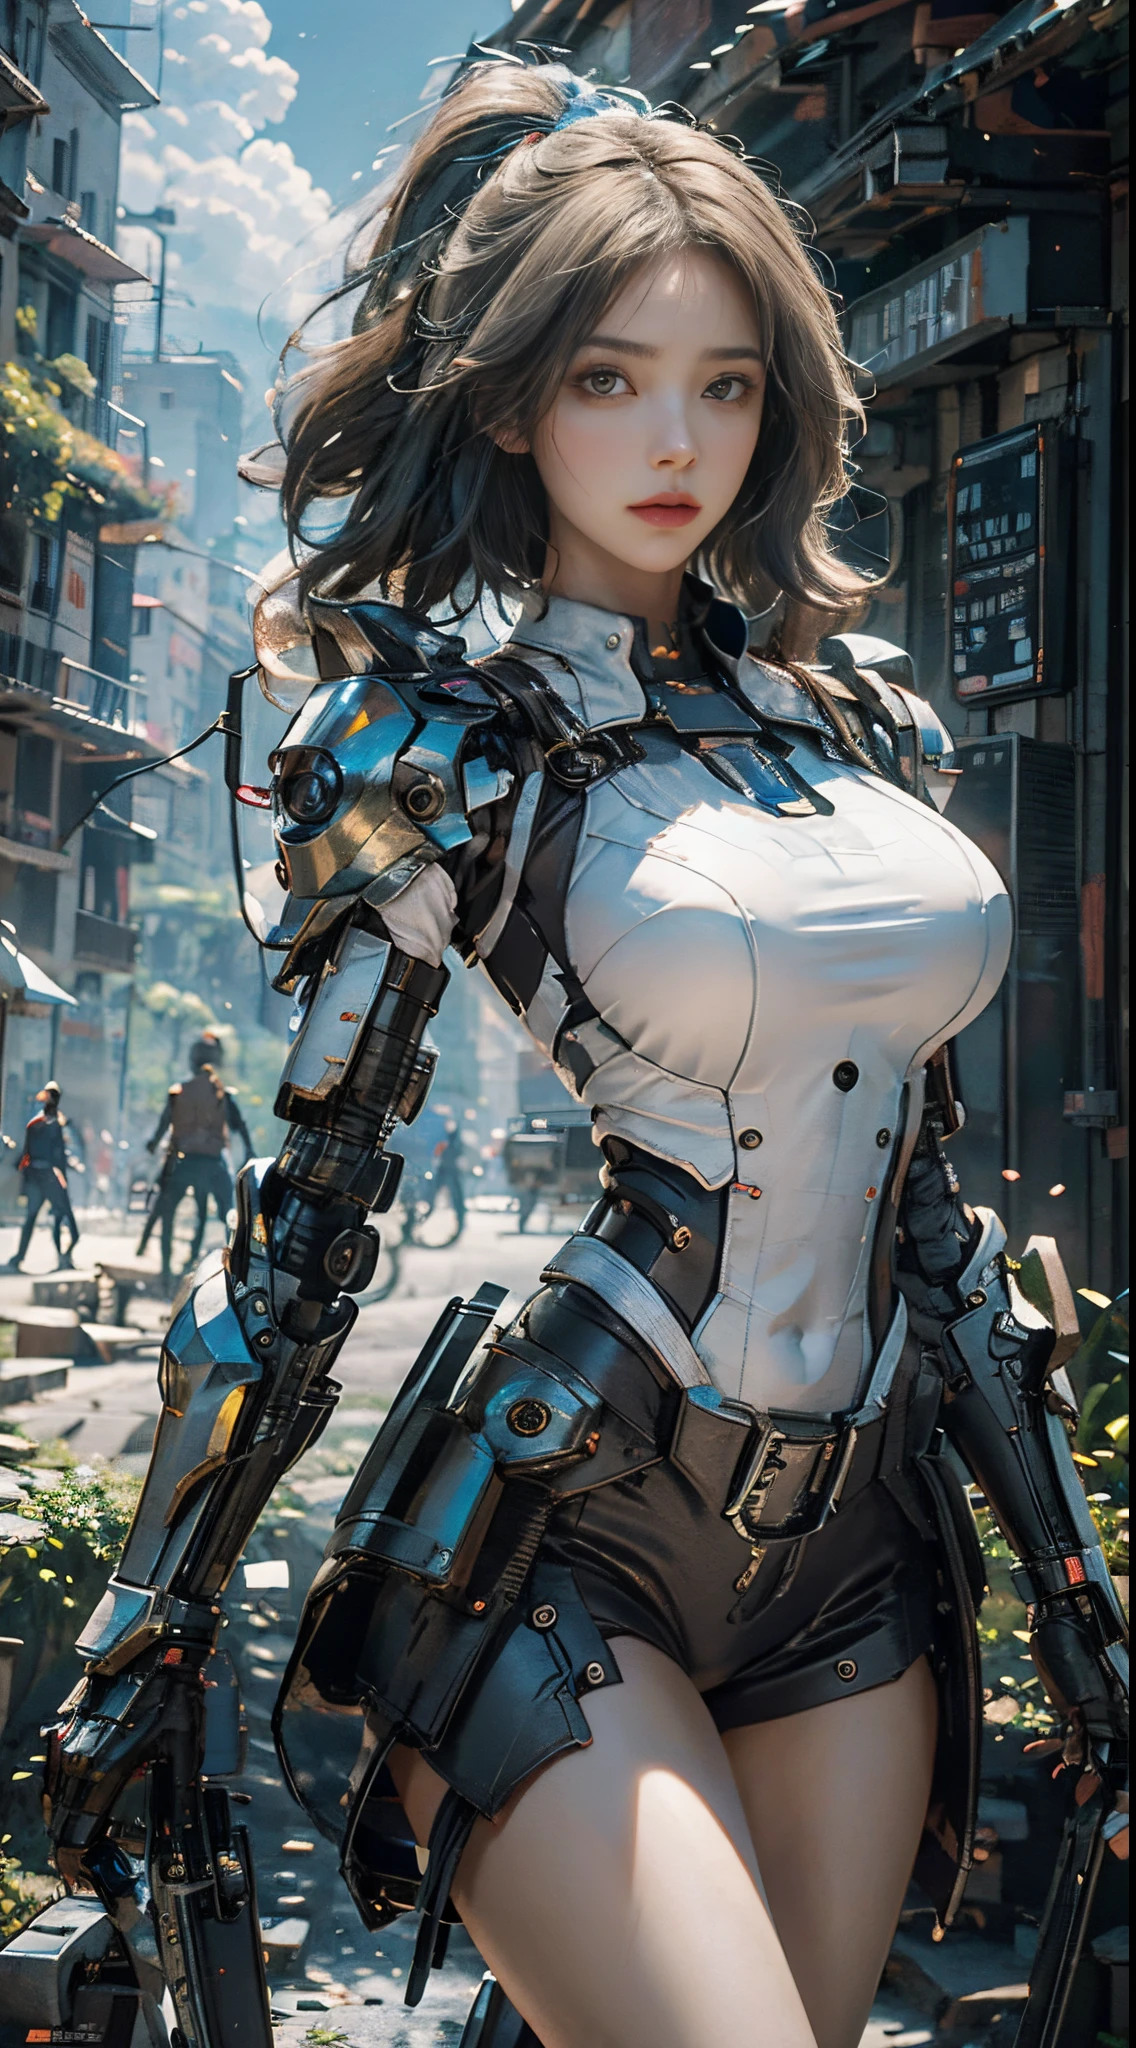 （（Best Quality））， （（tmasterpiece））， （He is very detailed：1.3）， ..3D， shitu-mecha， Beautiful cyberpunk woman with her pink mech in the ruins of the Forgotten War city， The belly button and arms are exposed，Ancient Techniques， HDR（HighDynamicRange）， ray tracing， NVIDIA RTX， Hyper resolution， Unreal 5， Sub-Surface Scatterring， PBR texture， post-process， Anisotropic filtering， Depth of fields， Maximum clarity and sharpness， Many layered textures， Albedo and Specular Maps， Surface Coloring，Accurately simulate light-material interactions，perfect proportions，Rendered by Octane，TwoToneLighting，Low ISO，white balance，trichotomy，wide opening，8K RAW，High Efficiency Sub-Pixel，sub-pixel convolution，Luminous Particle，Light scattering，Tyndall effect（full bodybian）， （Exquisite facial features）， （s the perfect face）， Angle Dynamic, white hair,bigtits